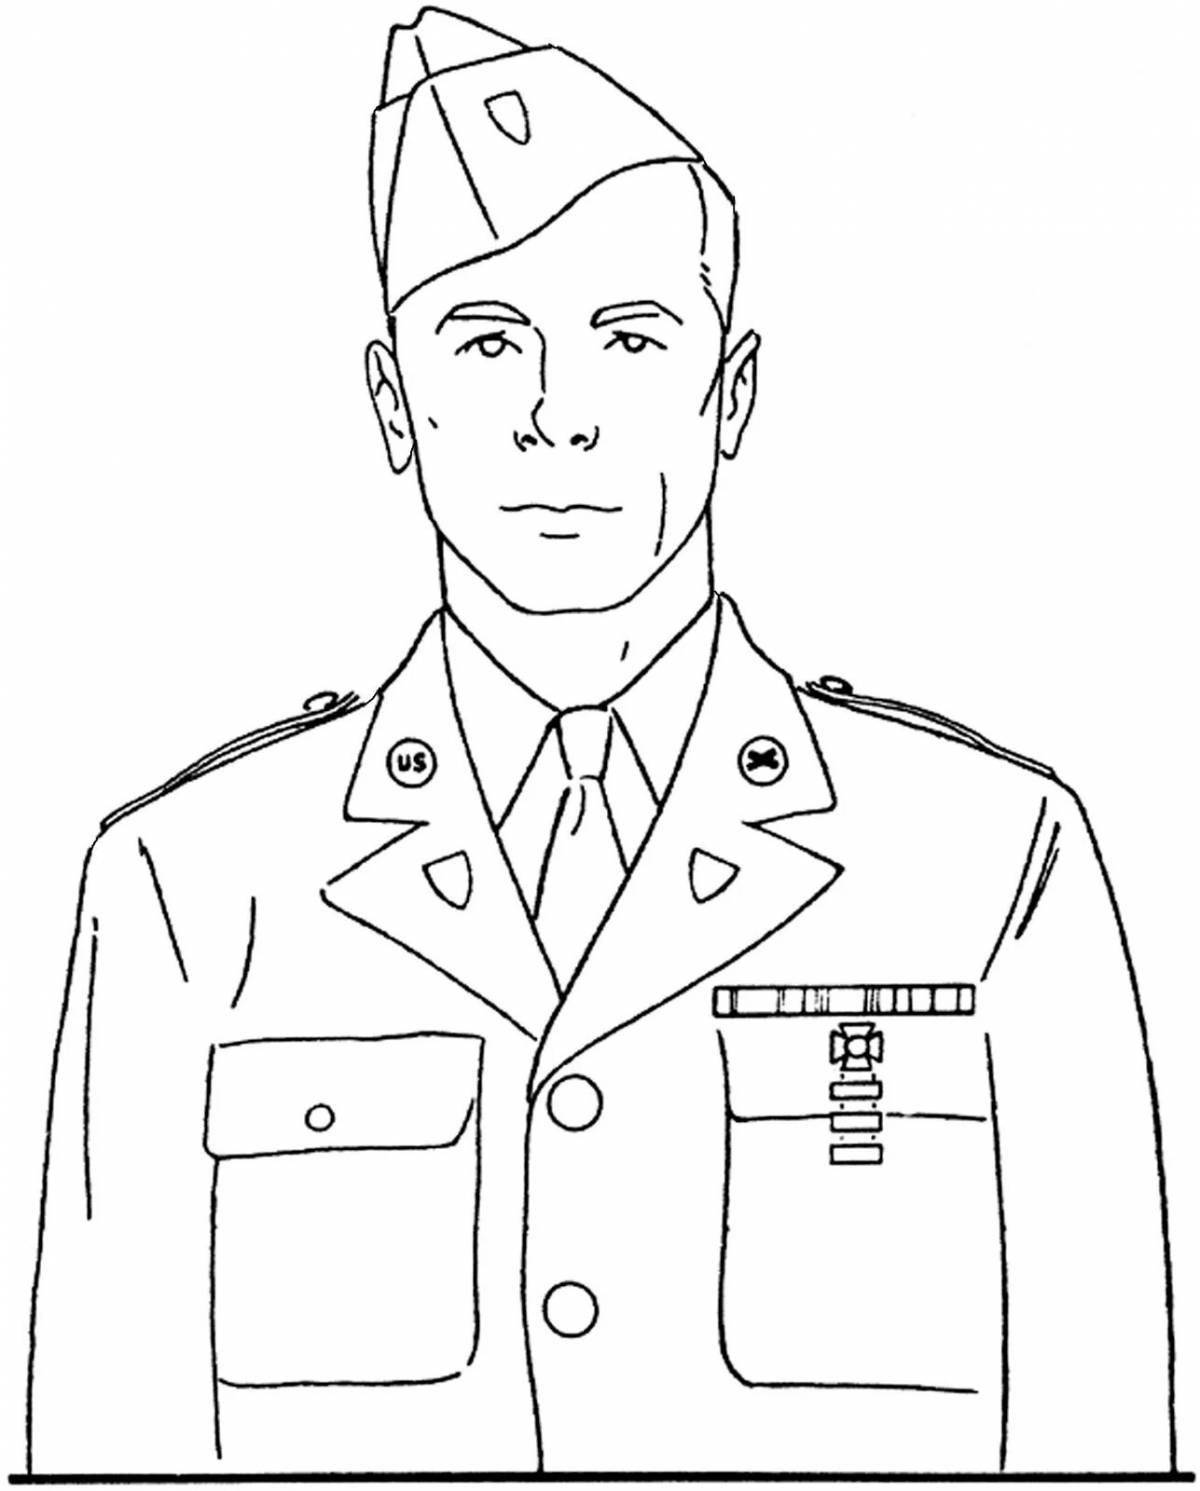 Majestic military portrait coloring page